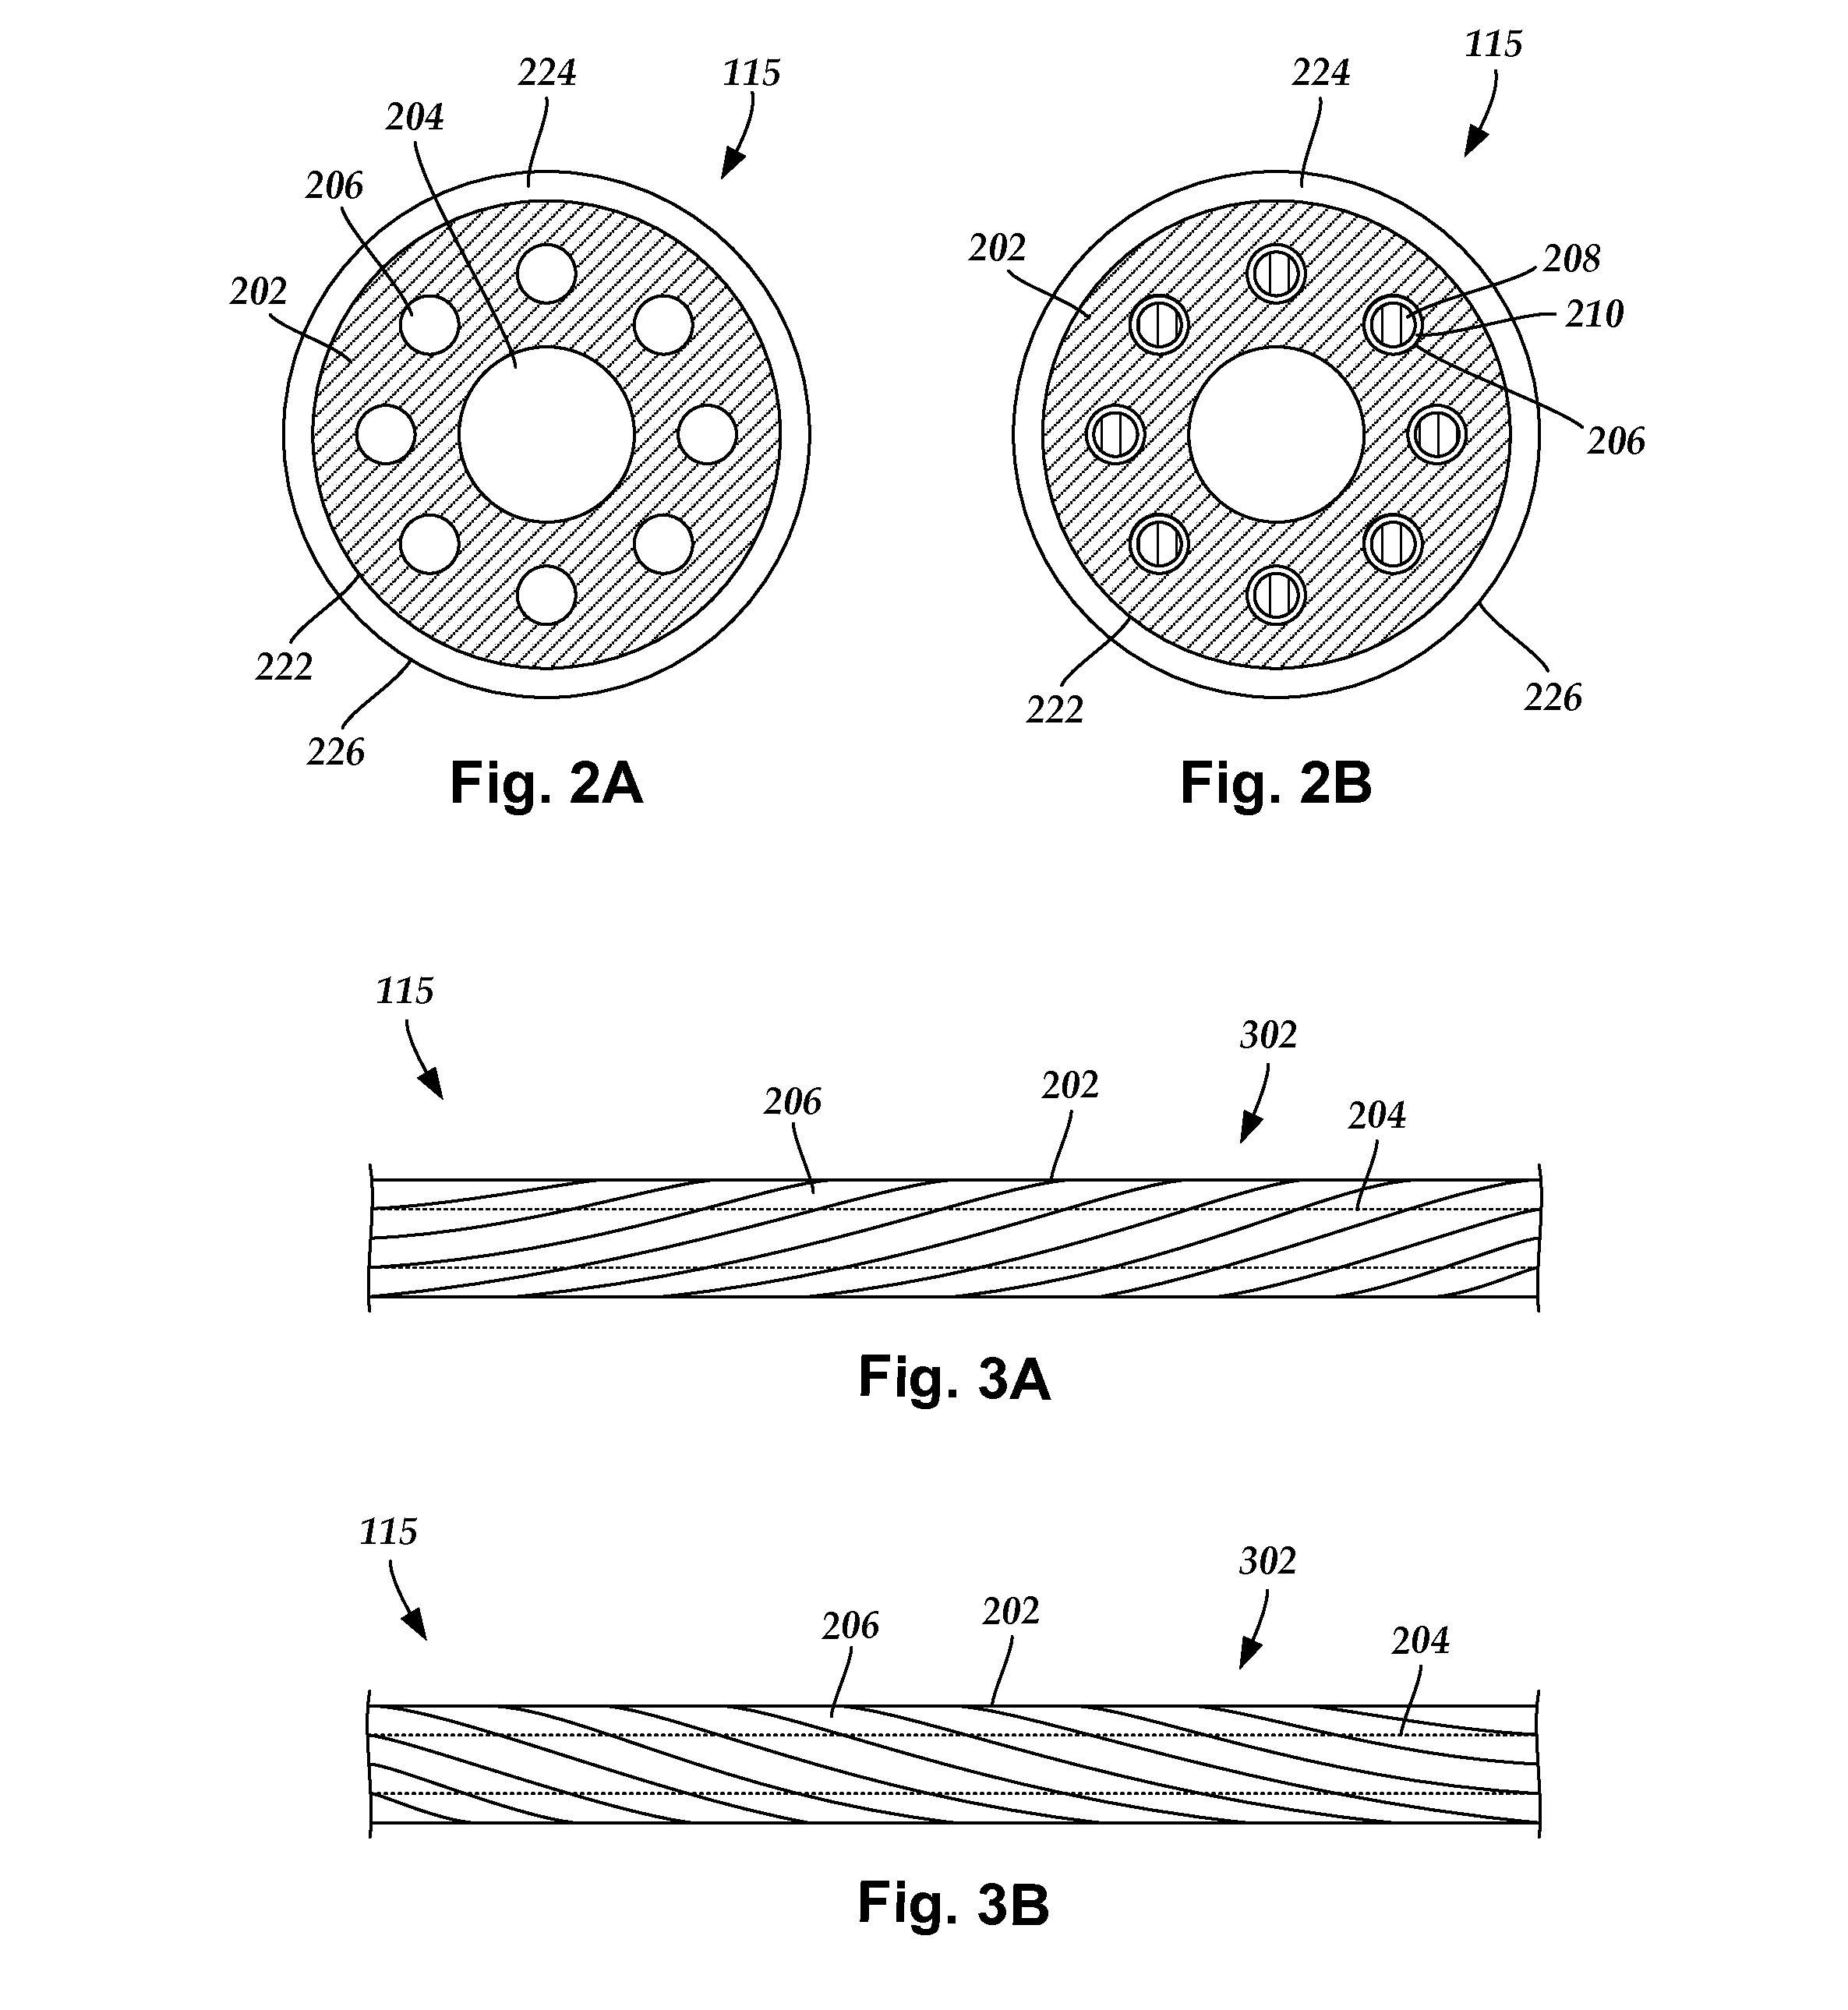 Systems and methods for identifying the circumferential positioning of electrodes of leads for electrical stimulation systems